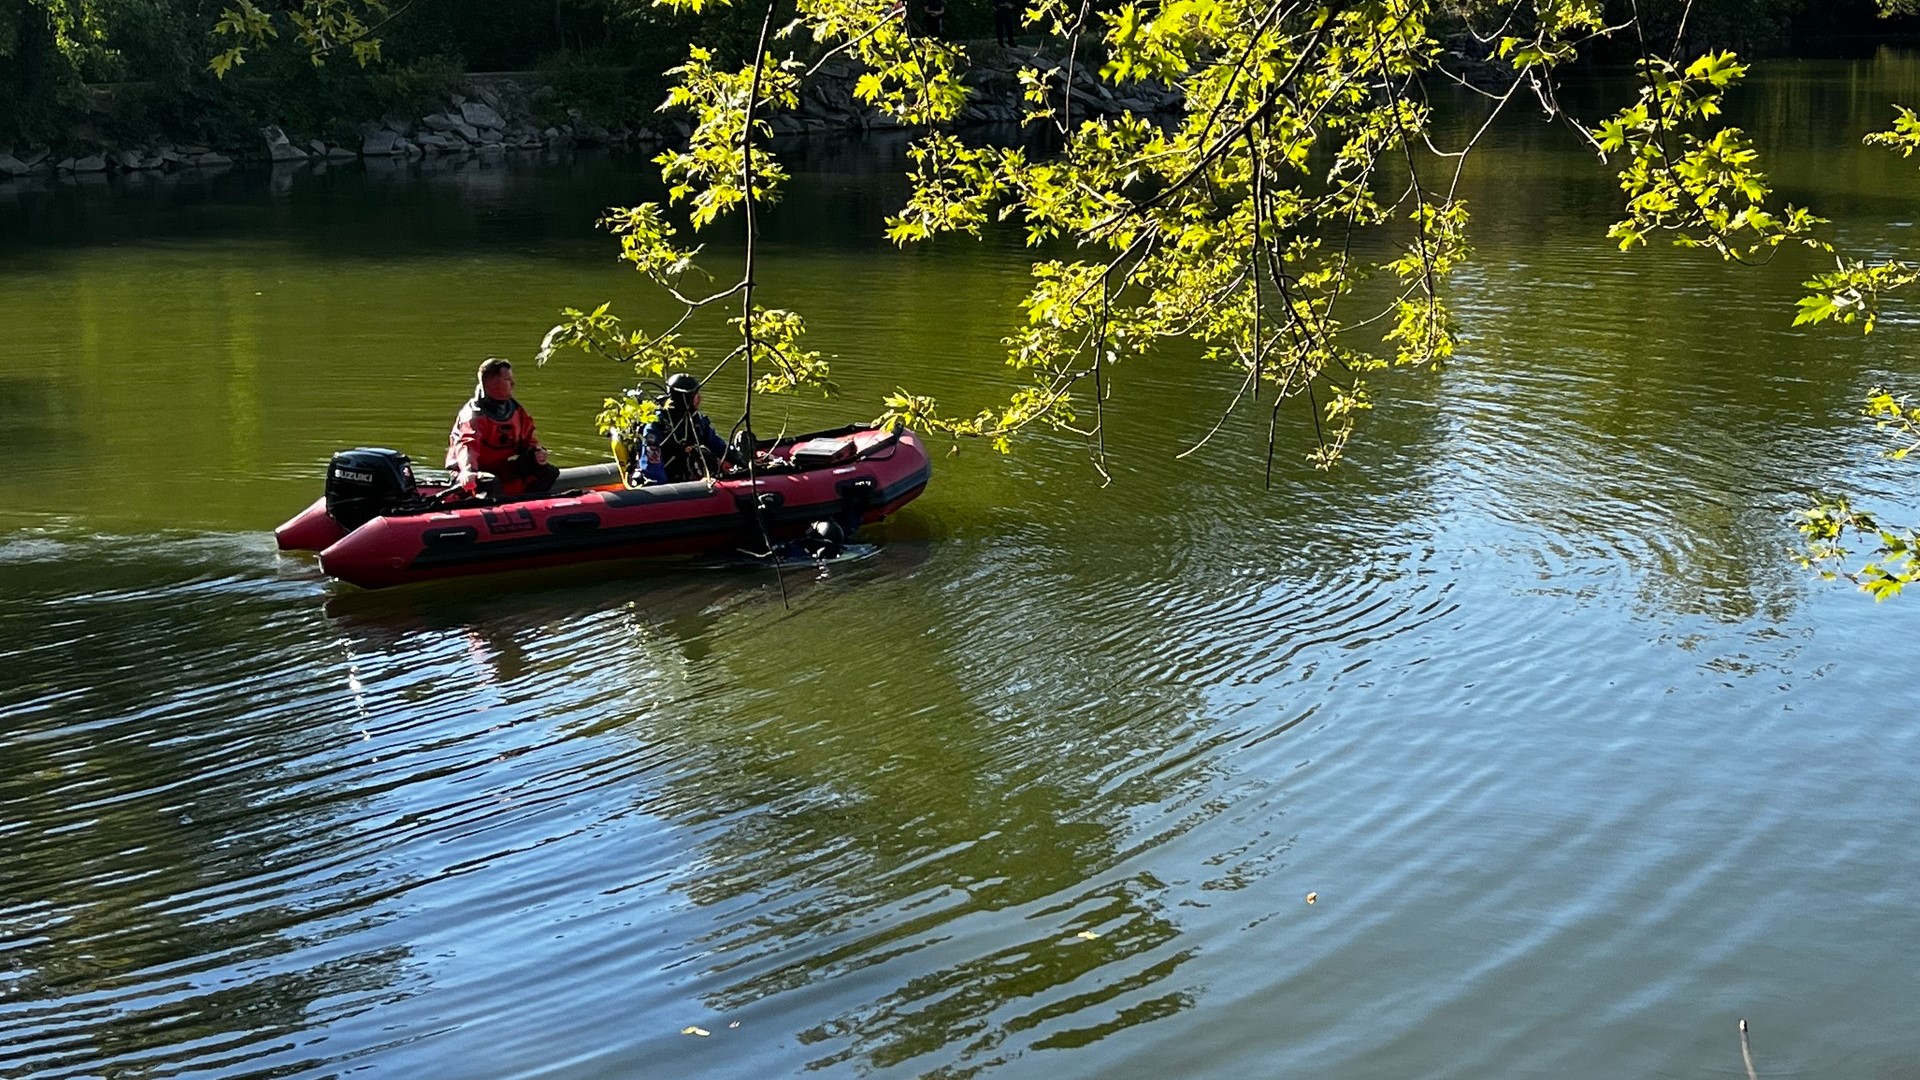 Investigators said Michael McCroy, 24, of Anderson, was attempting to swim across Shadyside Lake when he got tangled in something and drowned.